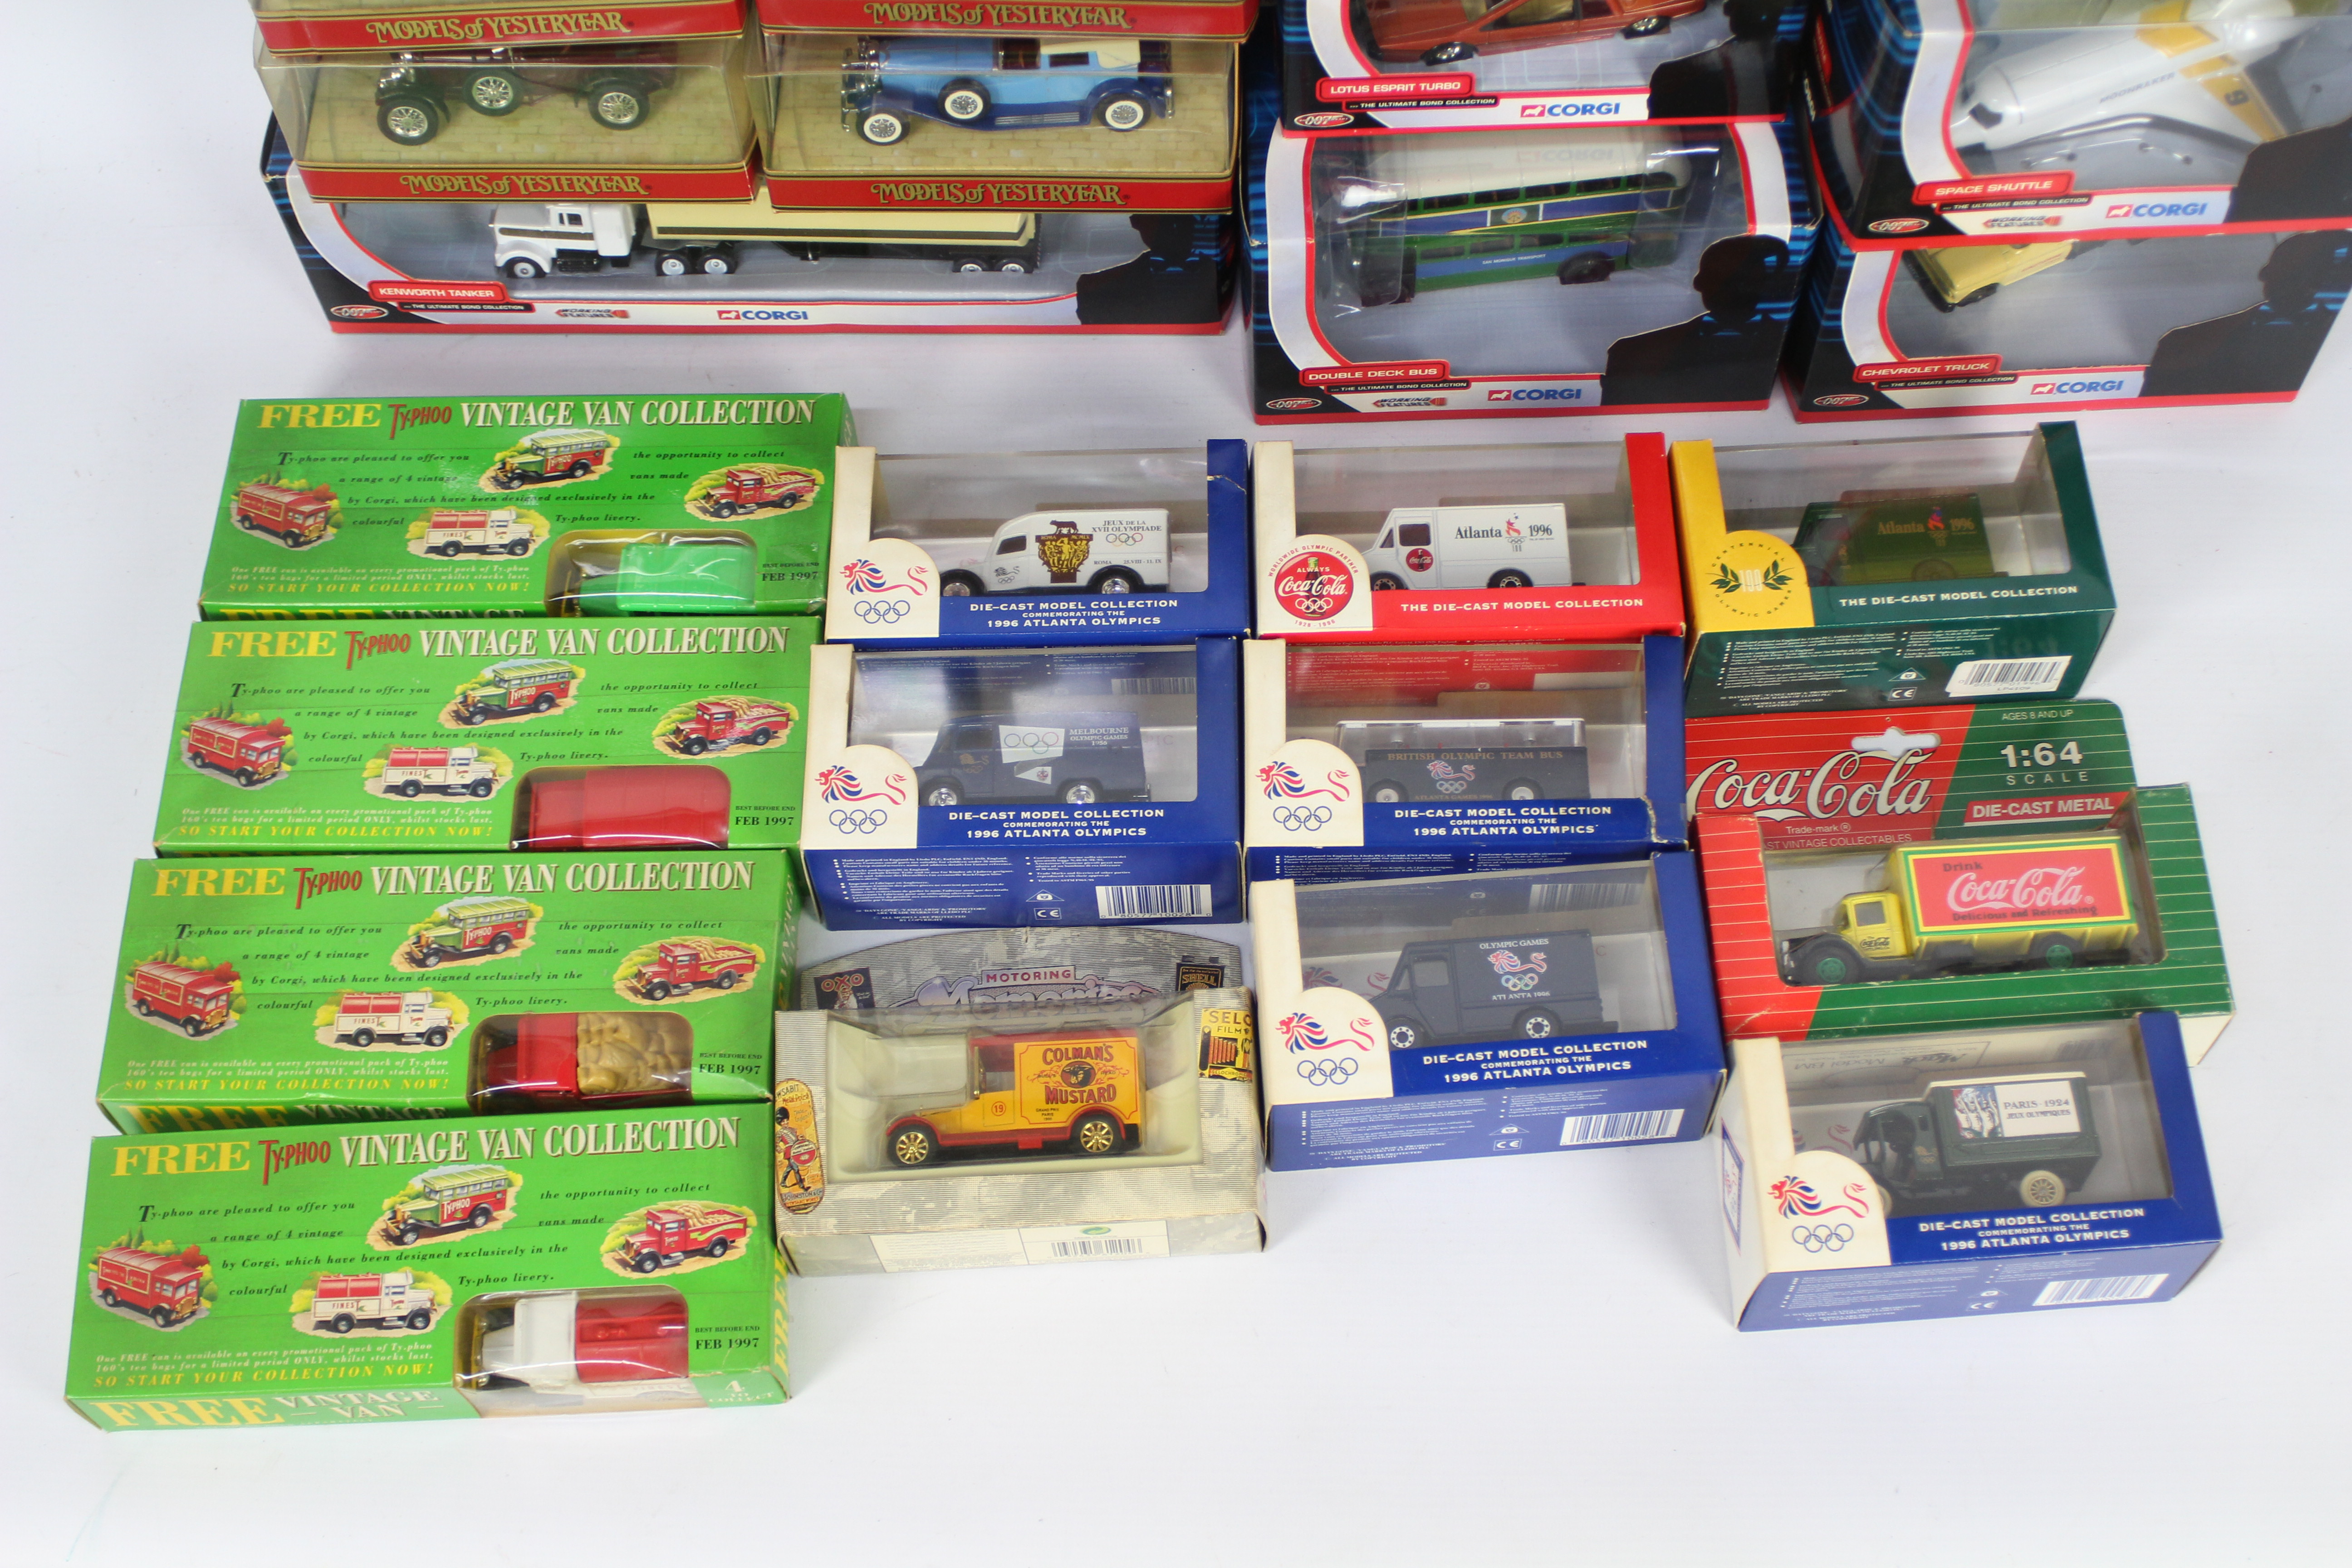 Corgi, Matchbox, Lledo - A collection of over 20 boxed diecast vehicles in various scales. - Image 2 of 3